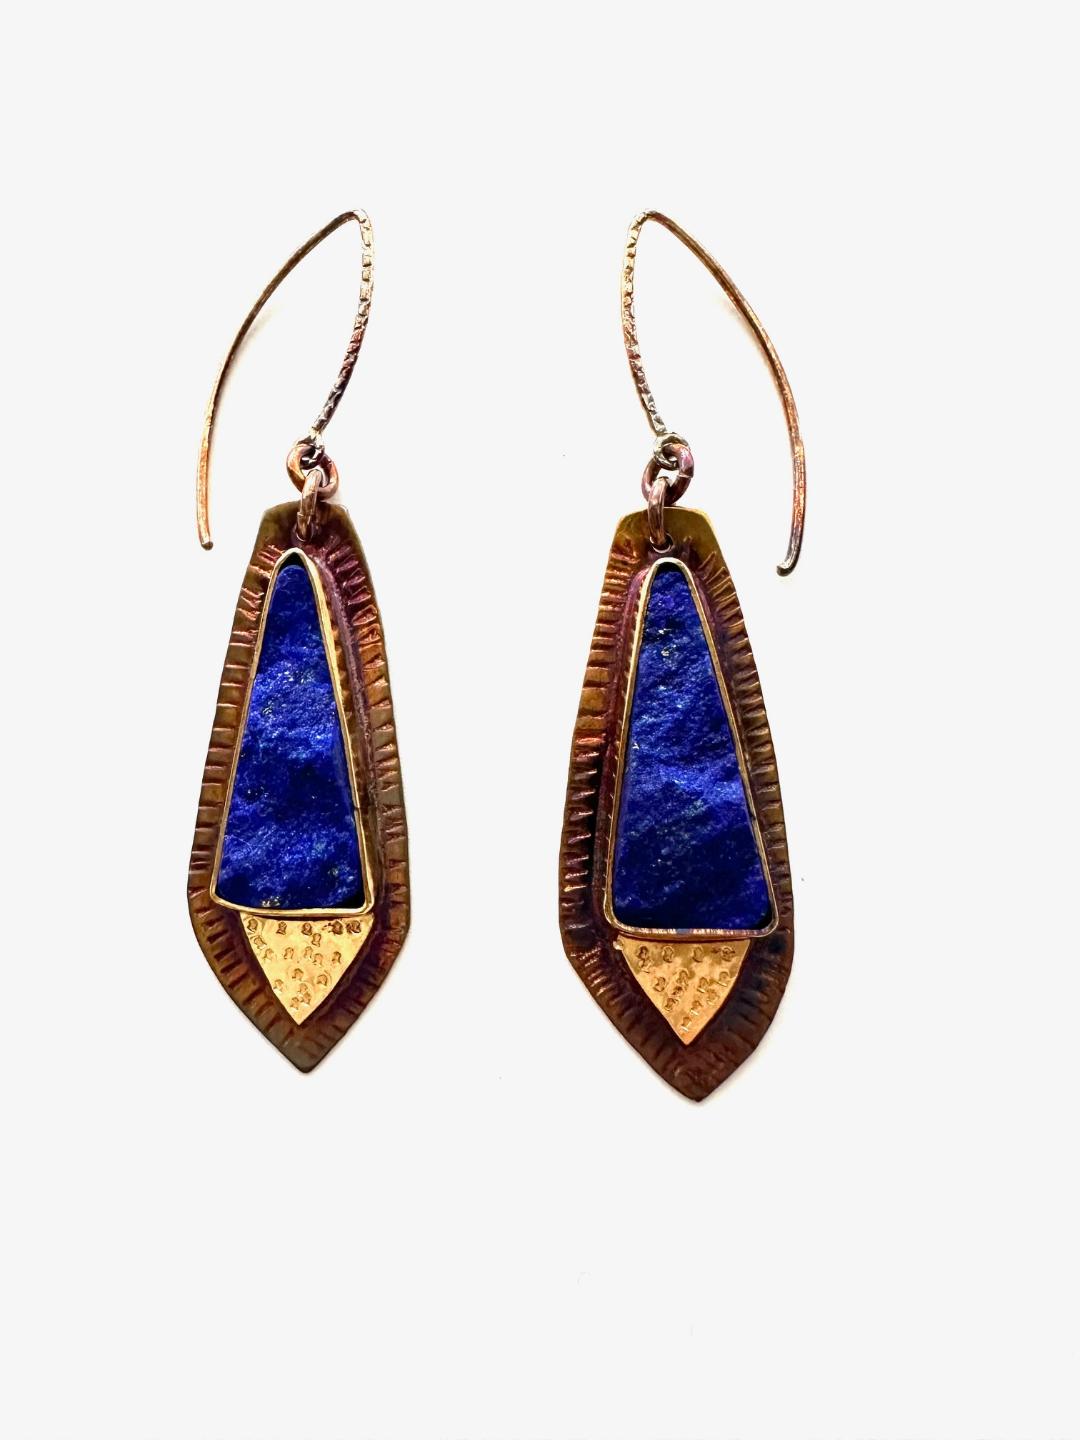 Sterling Silver, Fine Silver Bezels, 18k Gold, and Natural Surface Lapis Lazuli Earrings with Sterling Silver French Hooks